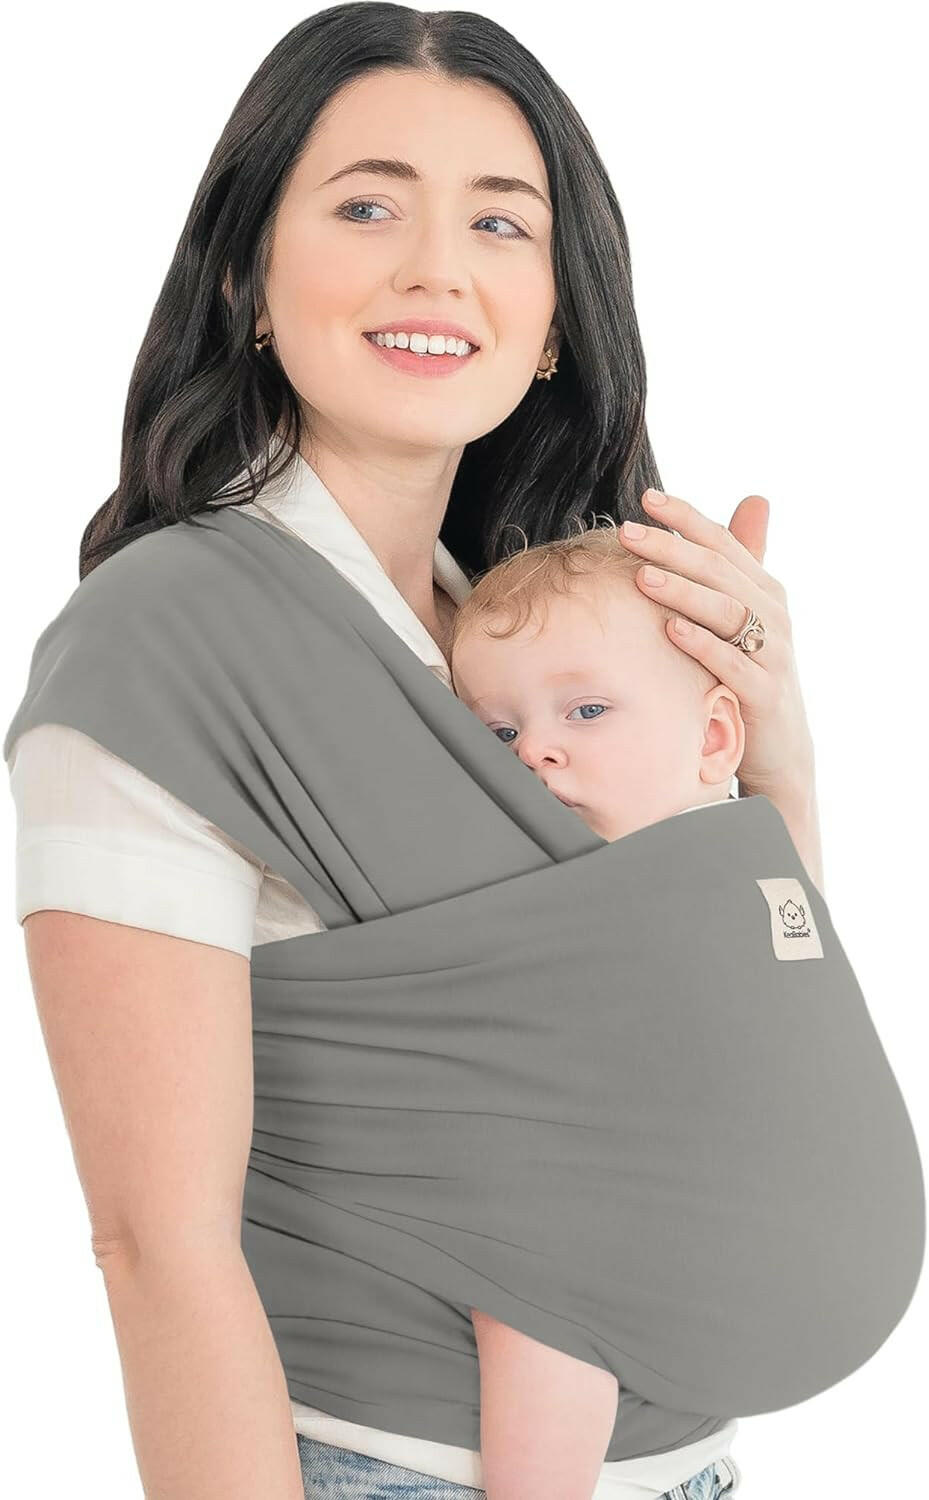 KeaBabies Baby Wrap Carrier - All in 1 Original Breathable Baby Sling